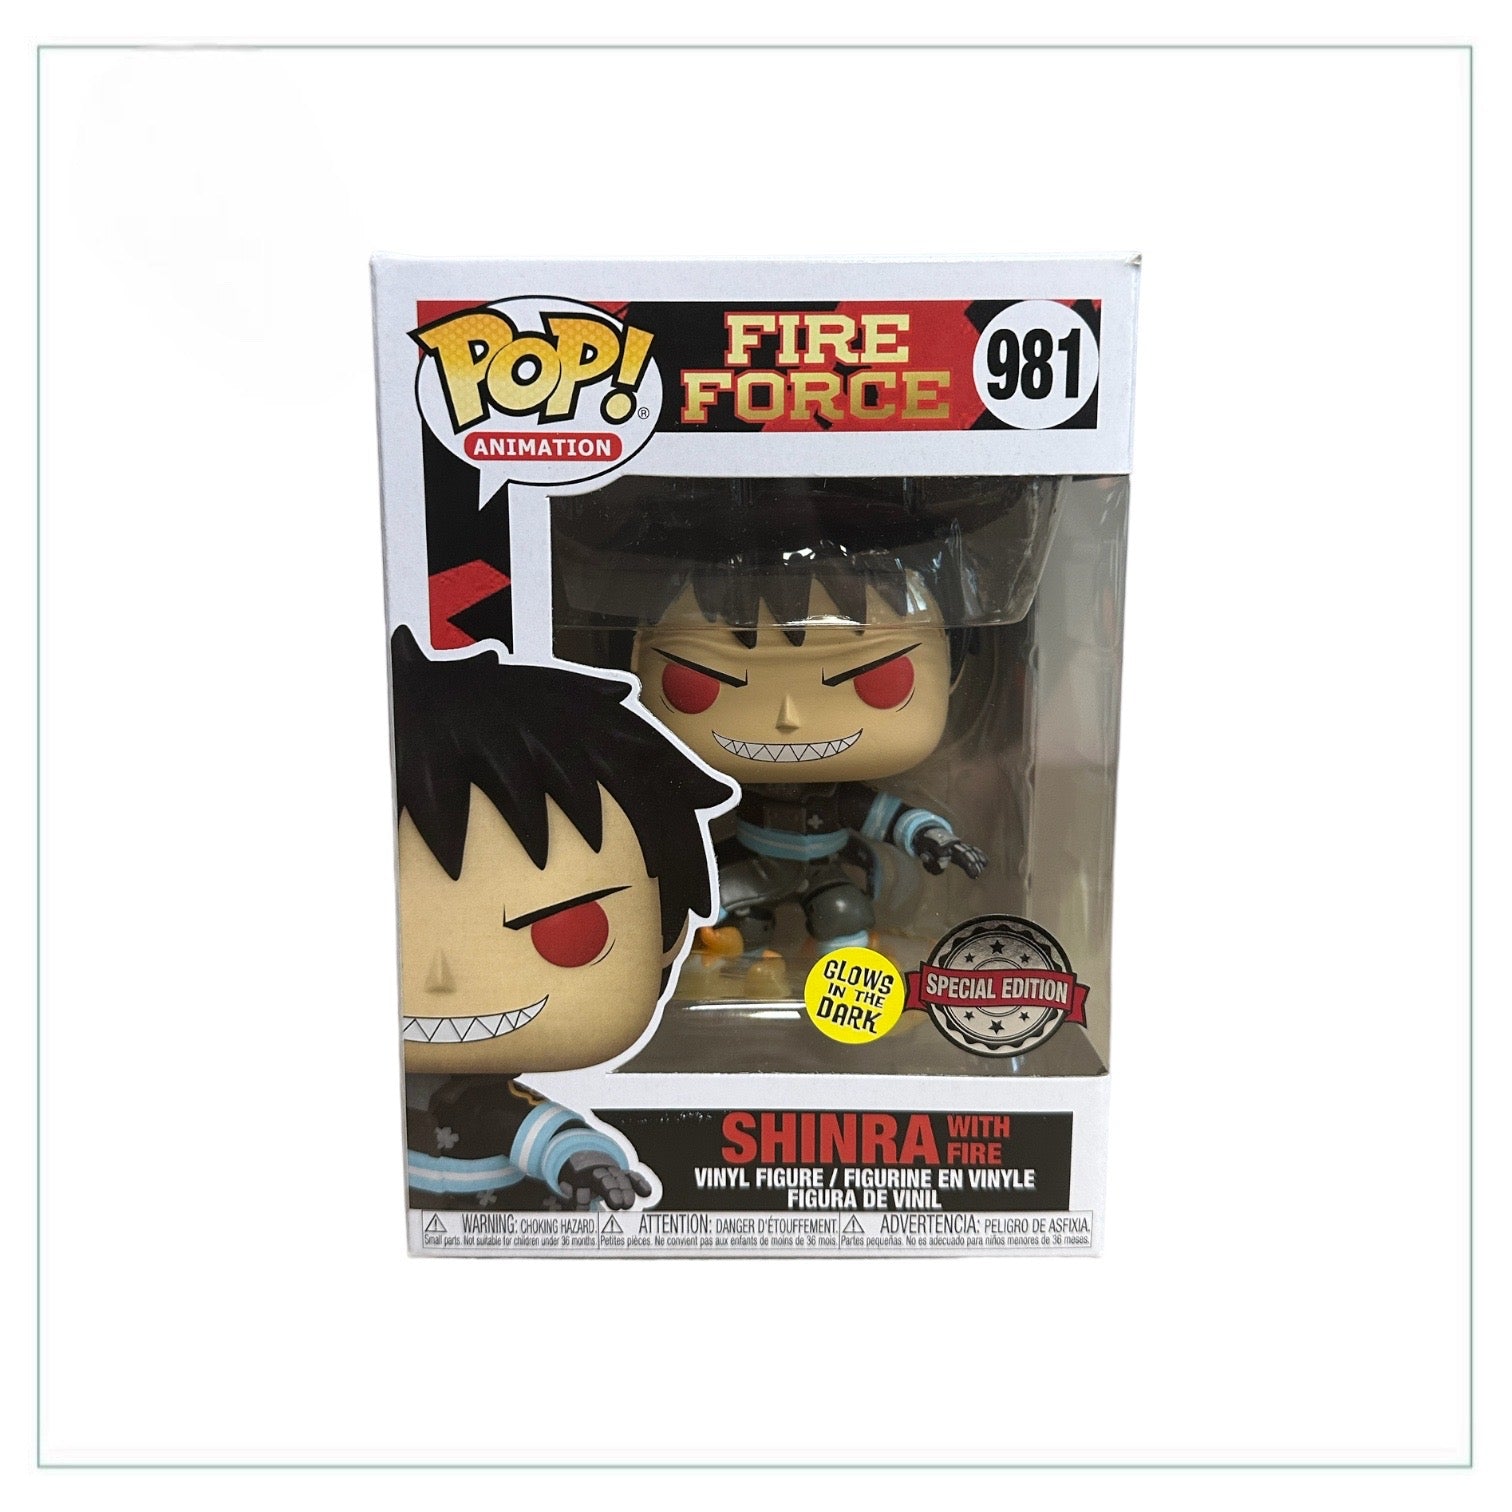 Shinra with Fire #981 (Glows in the Dark) Funko Pop! - Fire Force - Special Edition - Angry Cat